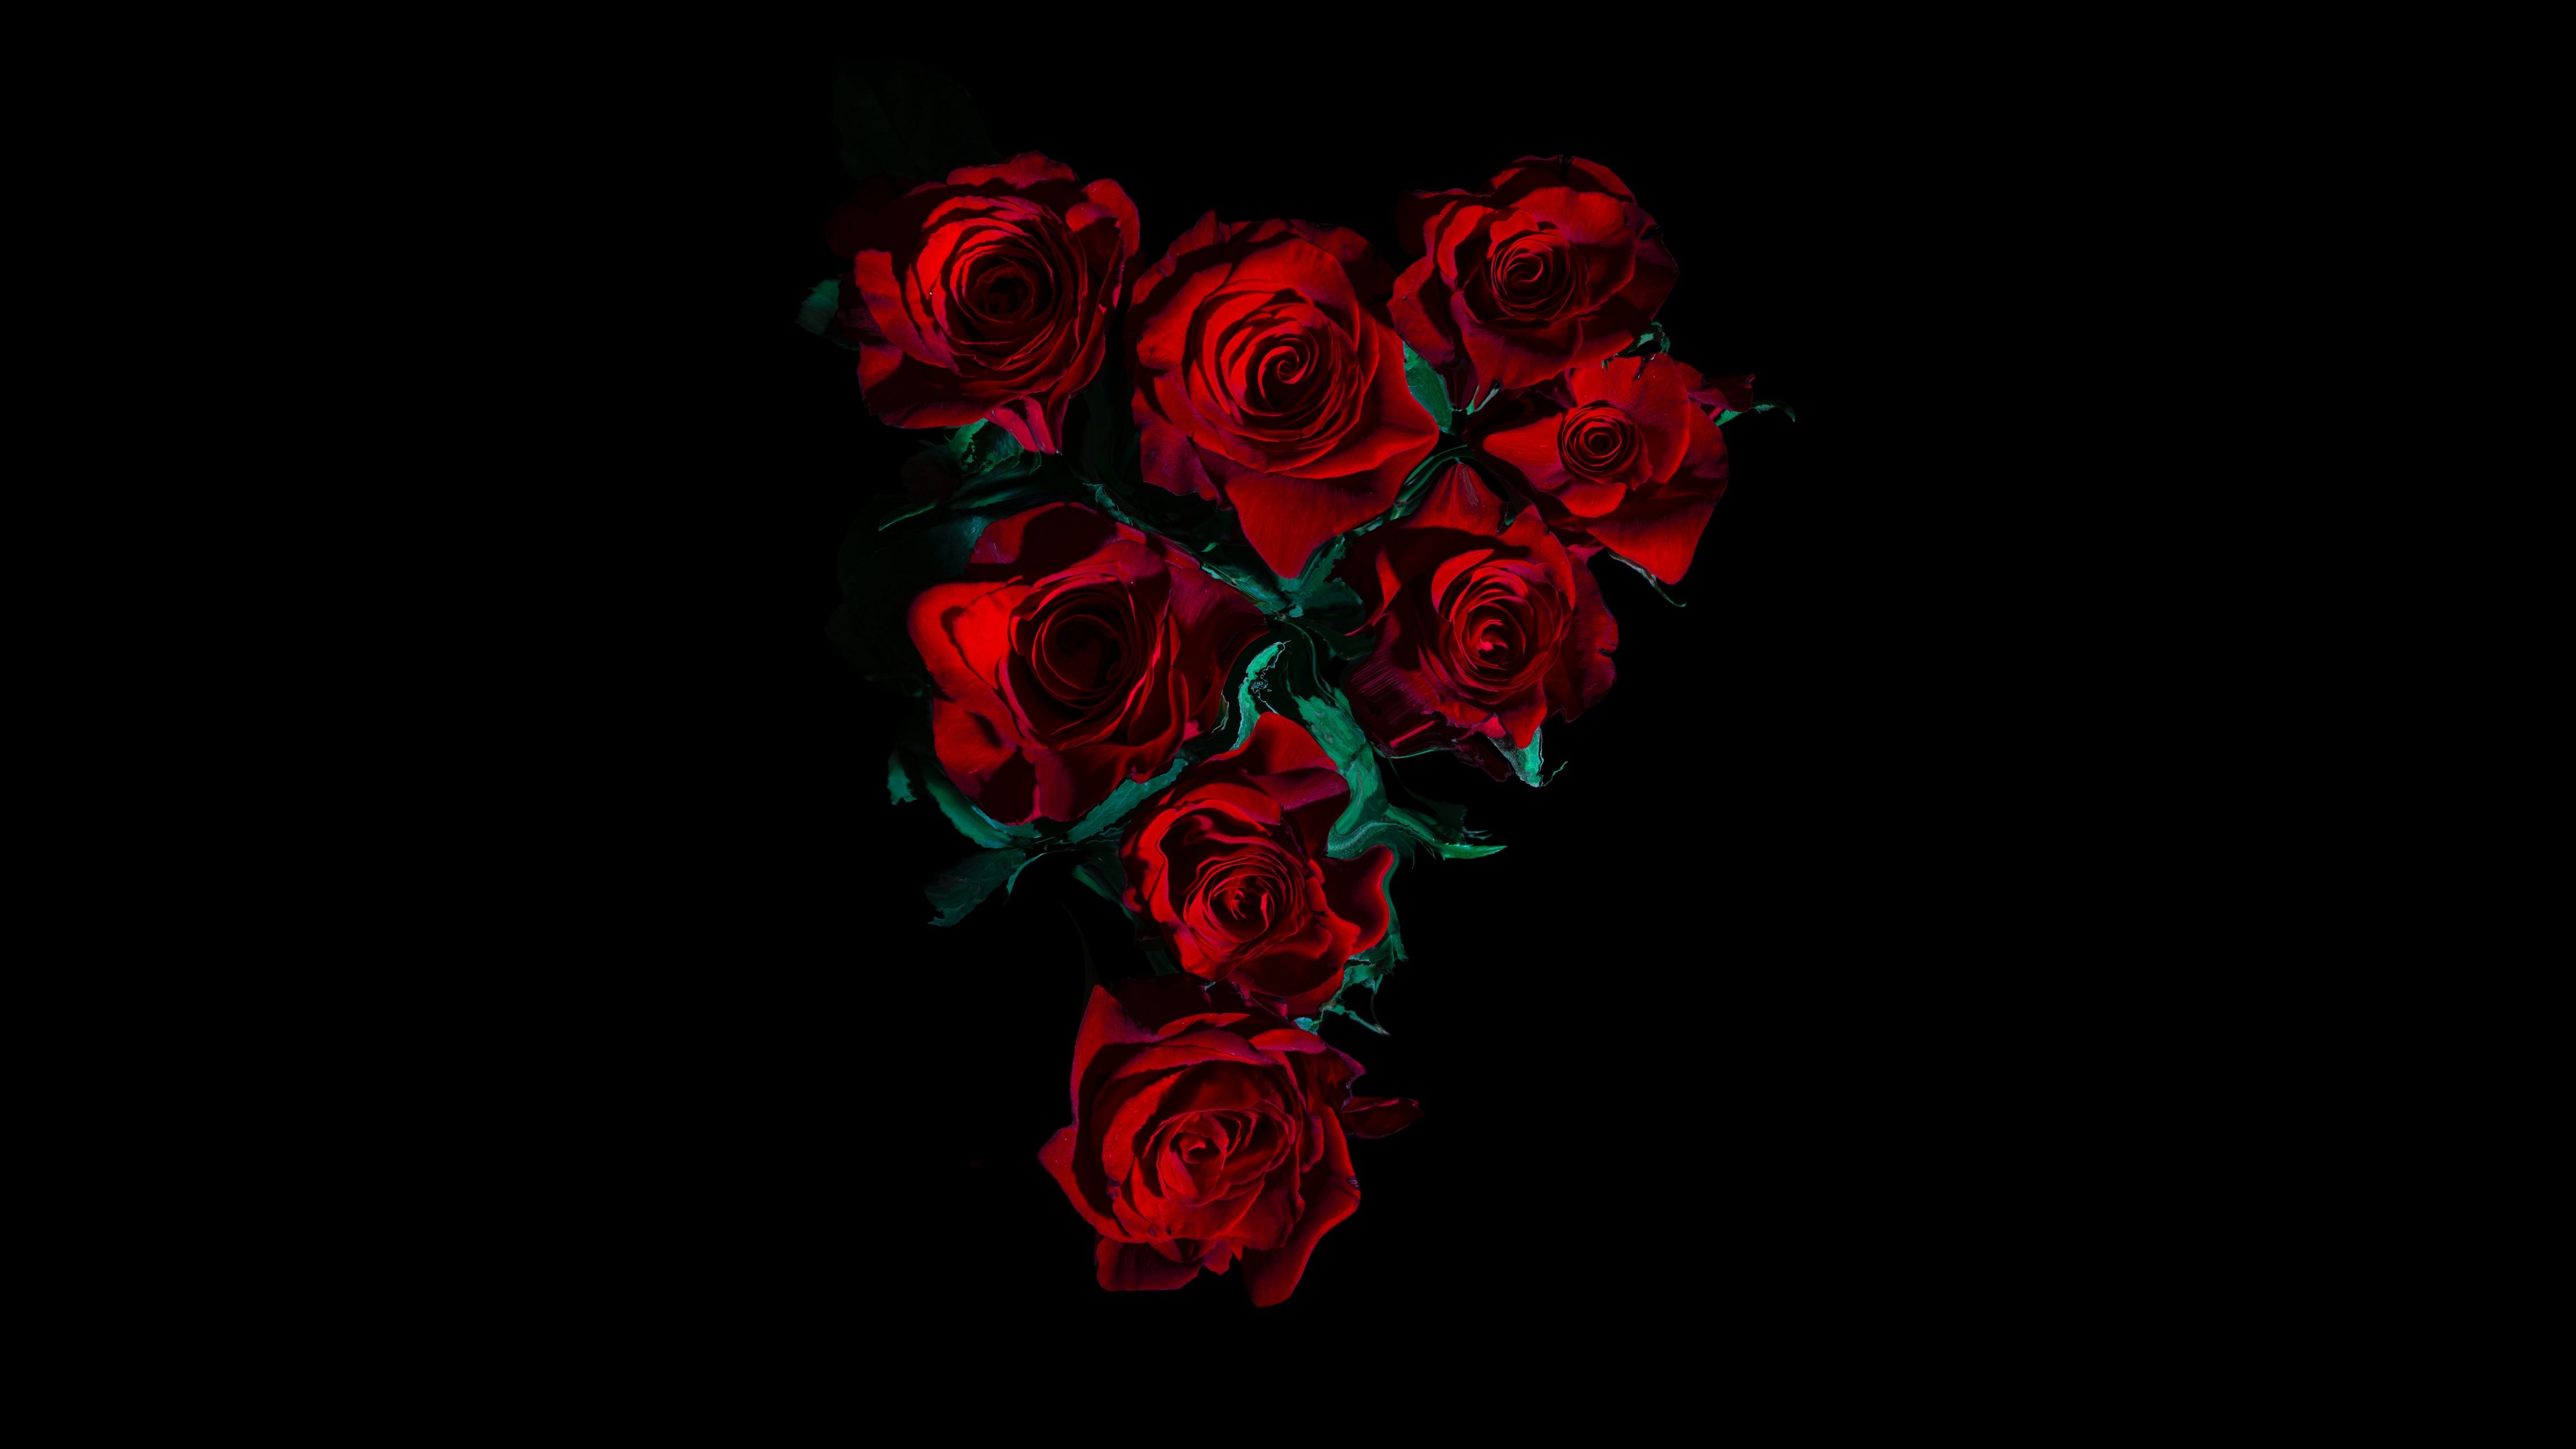 A heart made out of roses on a black background - Dark red, roses, black rose